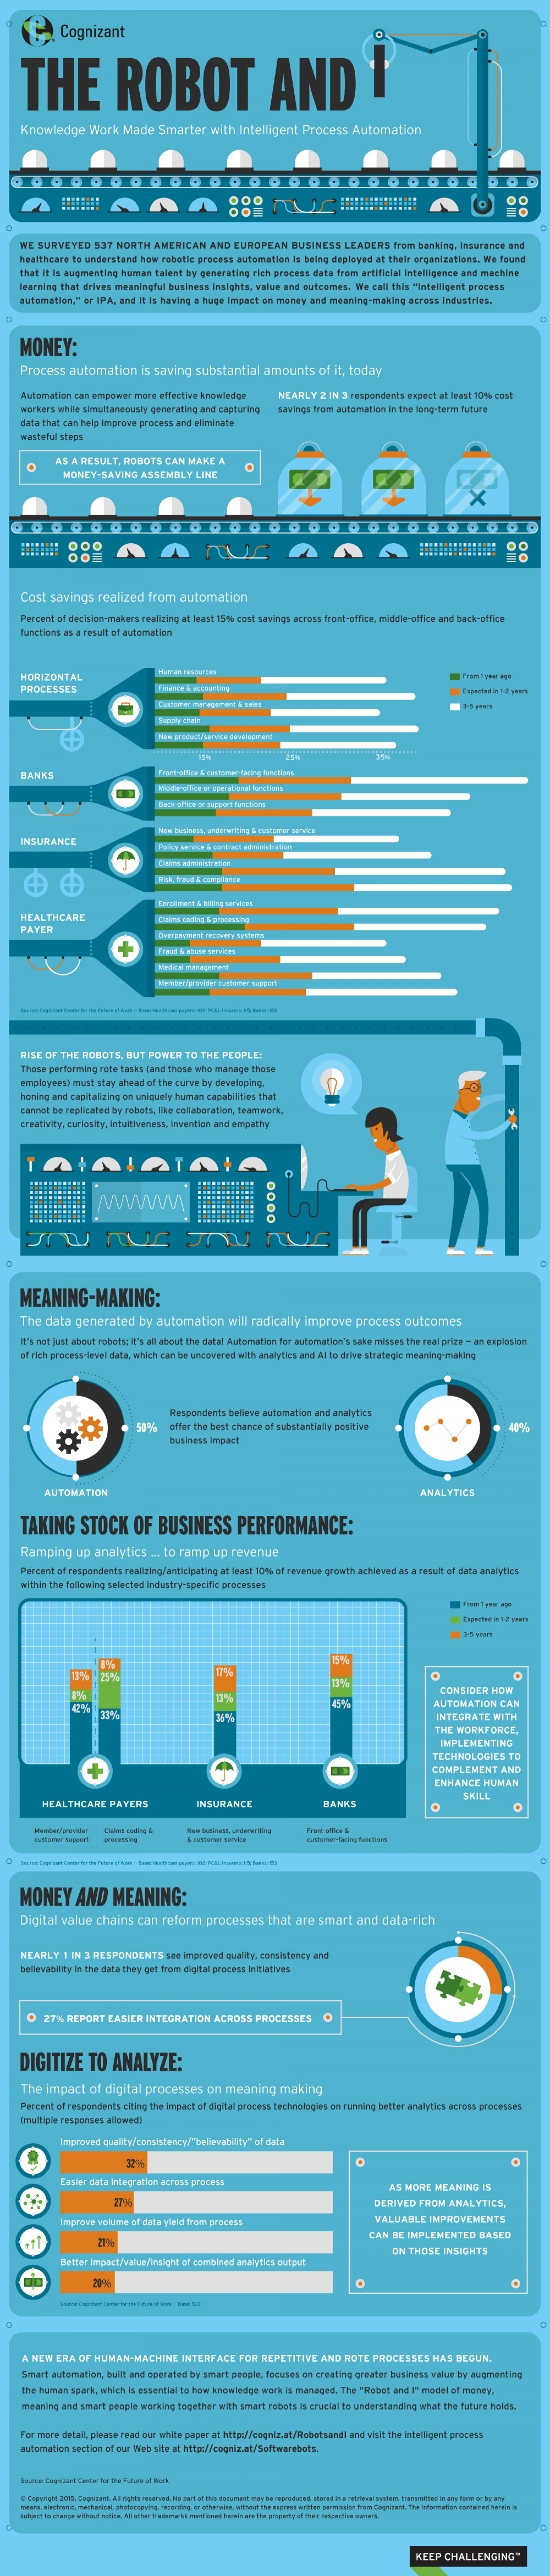 The Robot and I: How New Digital Technologies Are Making Smart People and Businesses Smarter by Automating Rote Work Infographic